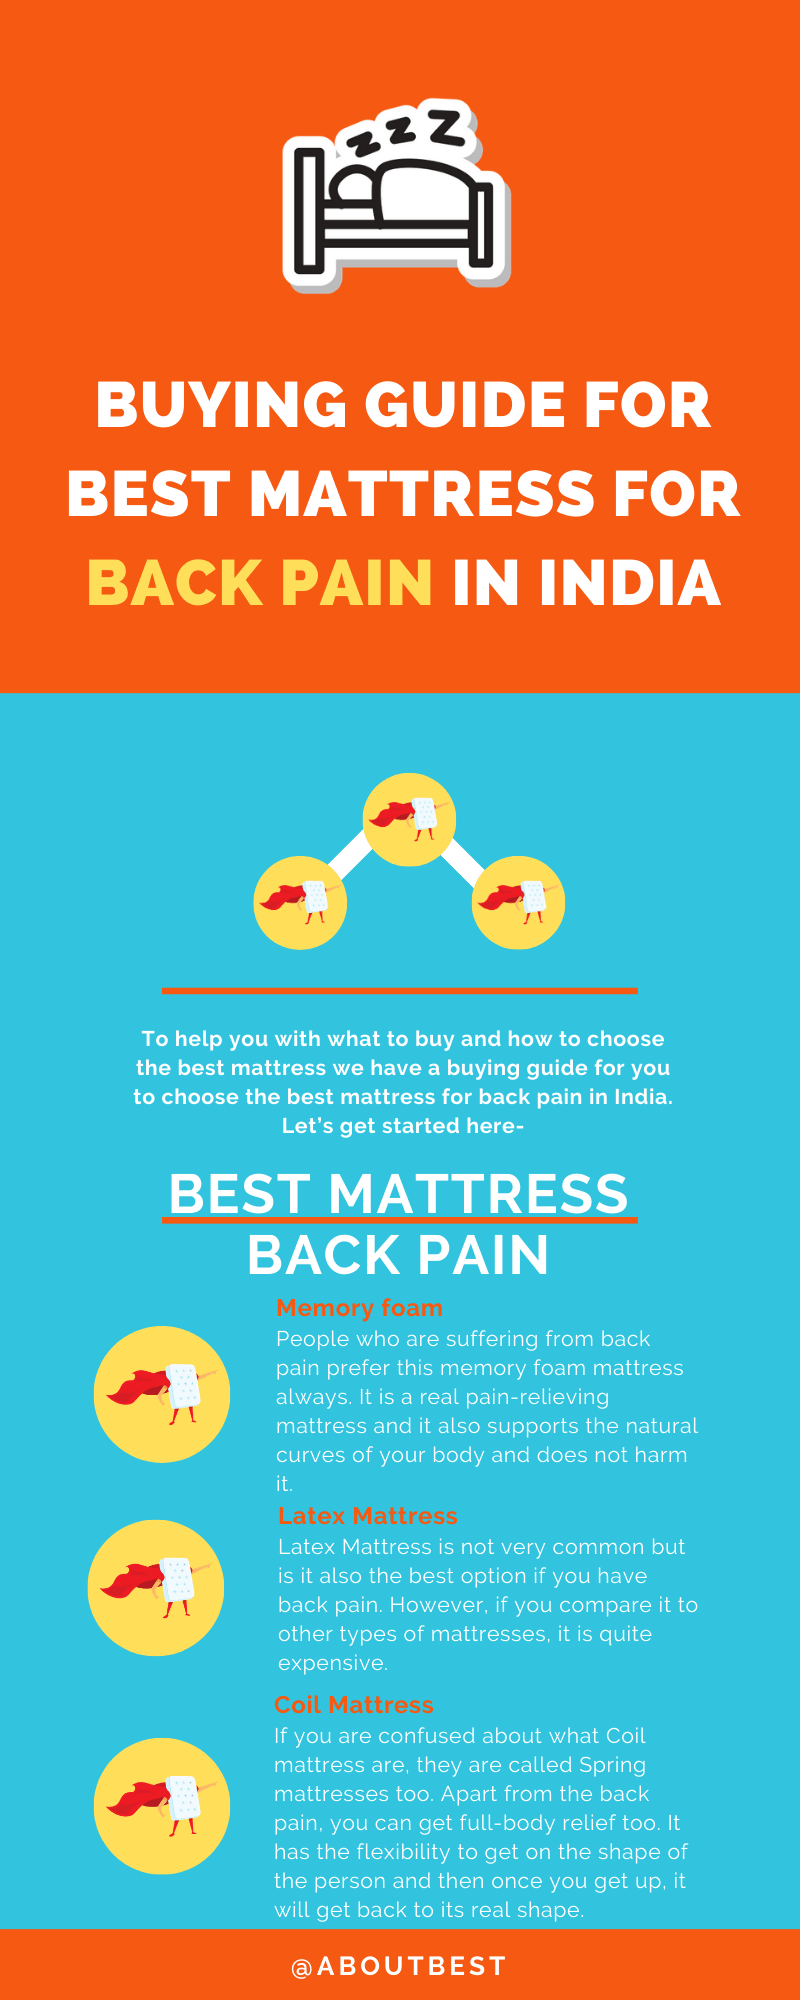 Buying guide for Best Mattress for Back Pain in India